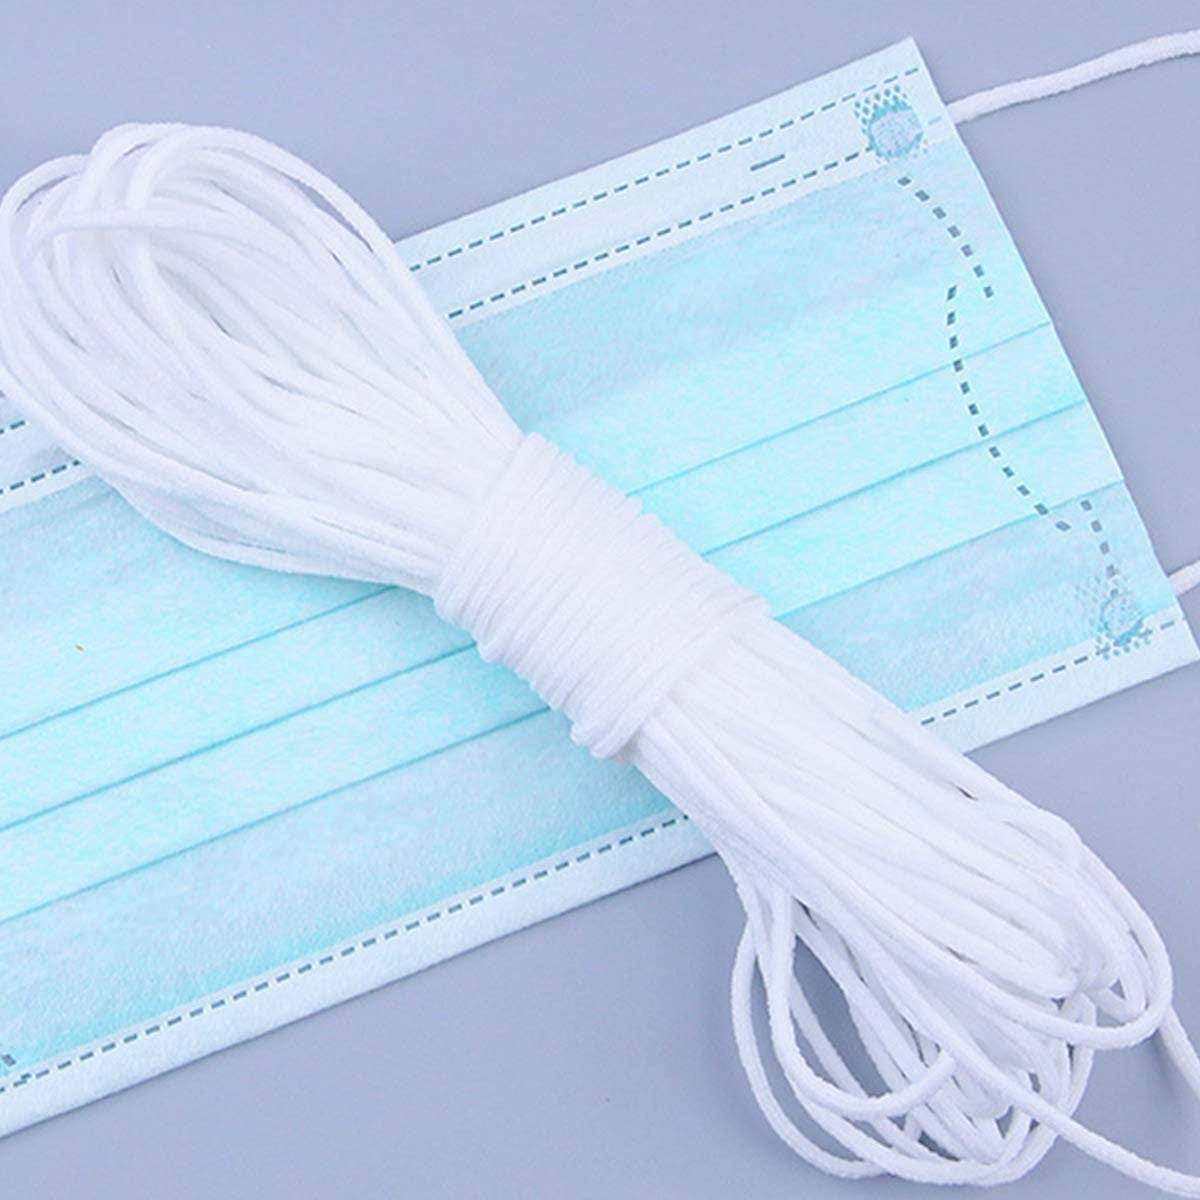 4 plastic clips Elastic cover Strap Earloop Cord Ear Tie Rope Handmade String Sewing Contains 2 elastic ropes 